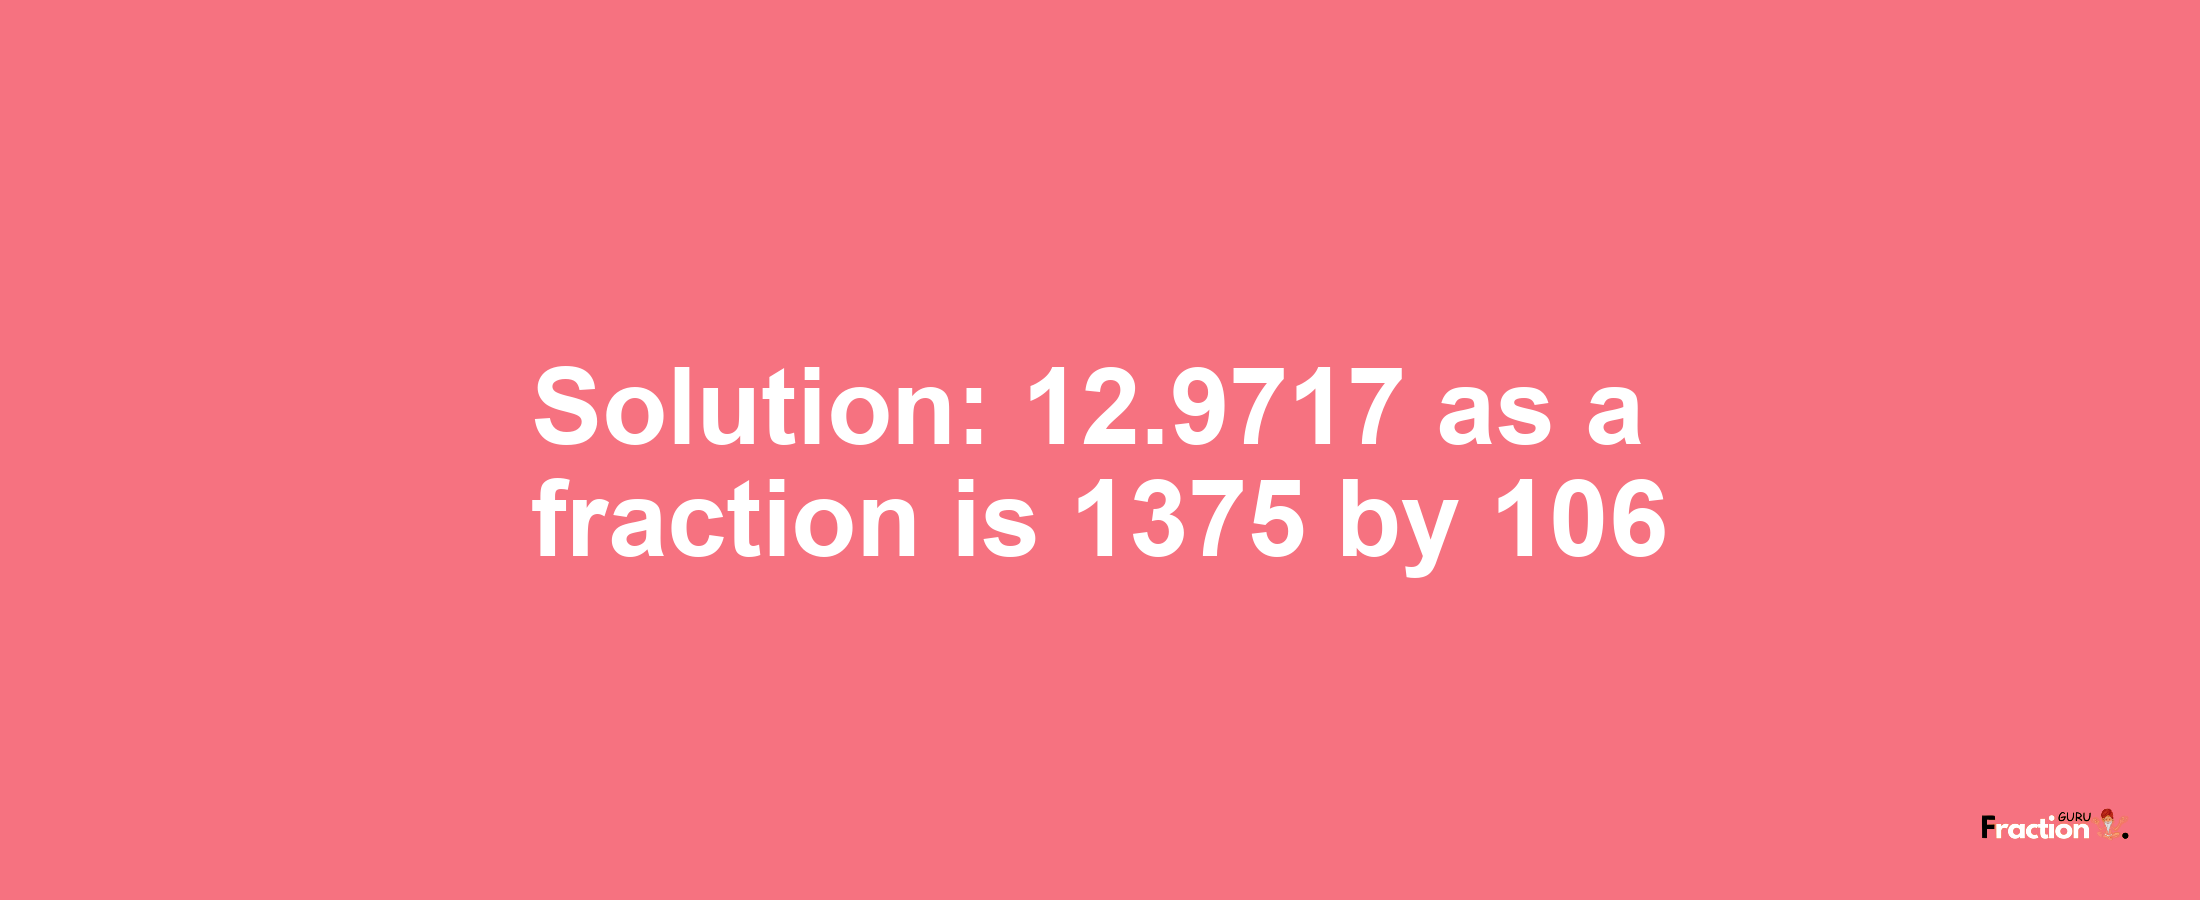 Solution:12.9717 as a fraction is 1375/106